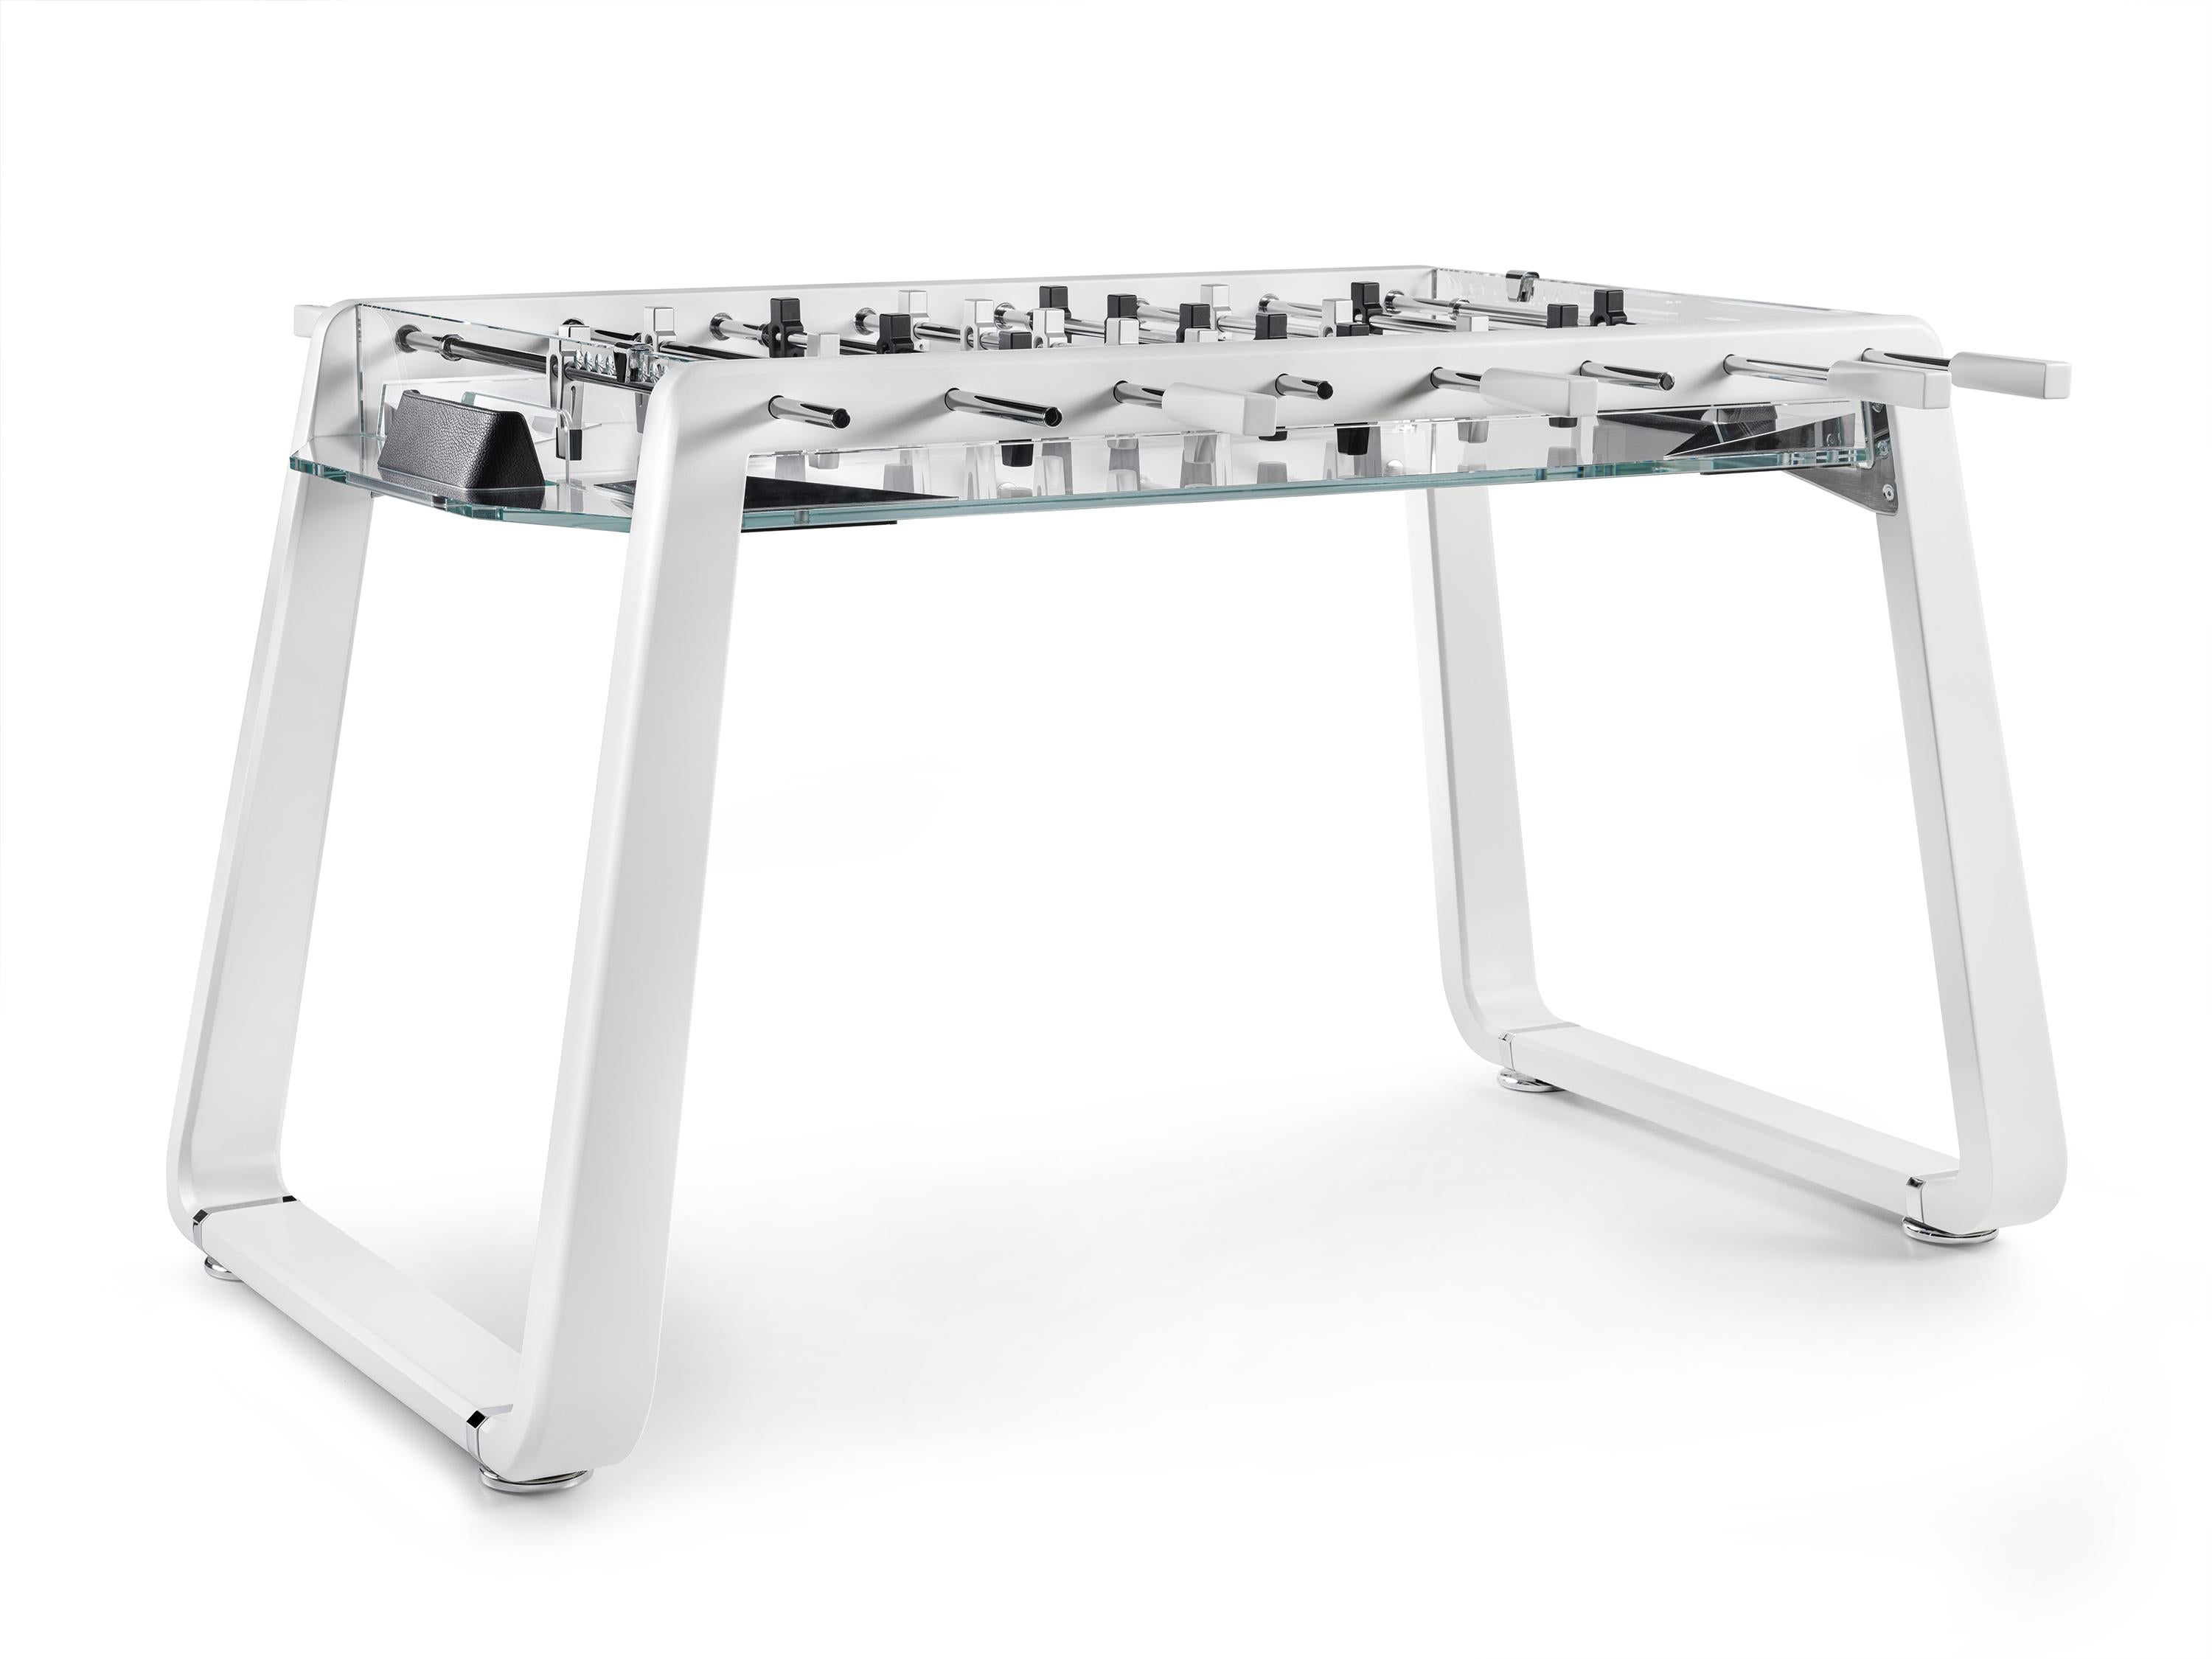 The Derby Canvas is a visionary Foosball table that pushes the boundaries of luxury design within the game table industry. Ambitiously reinterpreting the classics, this piece demonstrates the sophistication and ingenuity of Italian design and